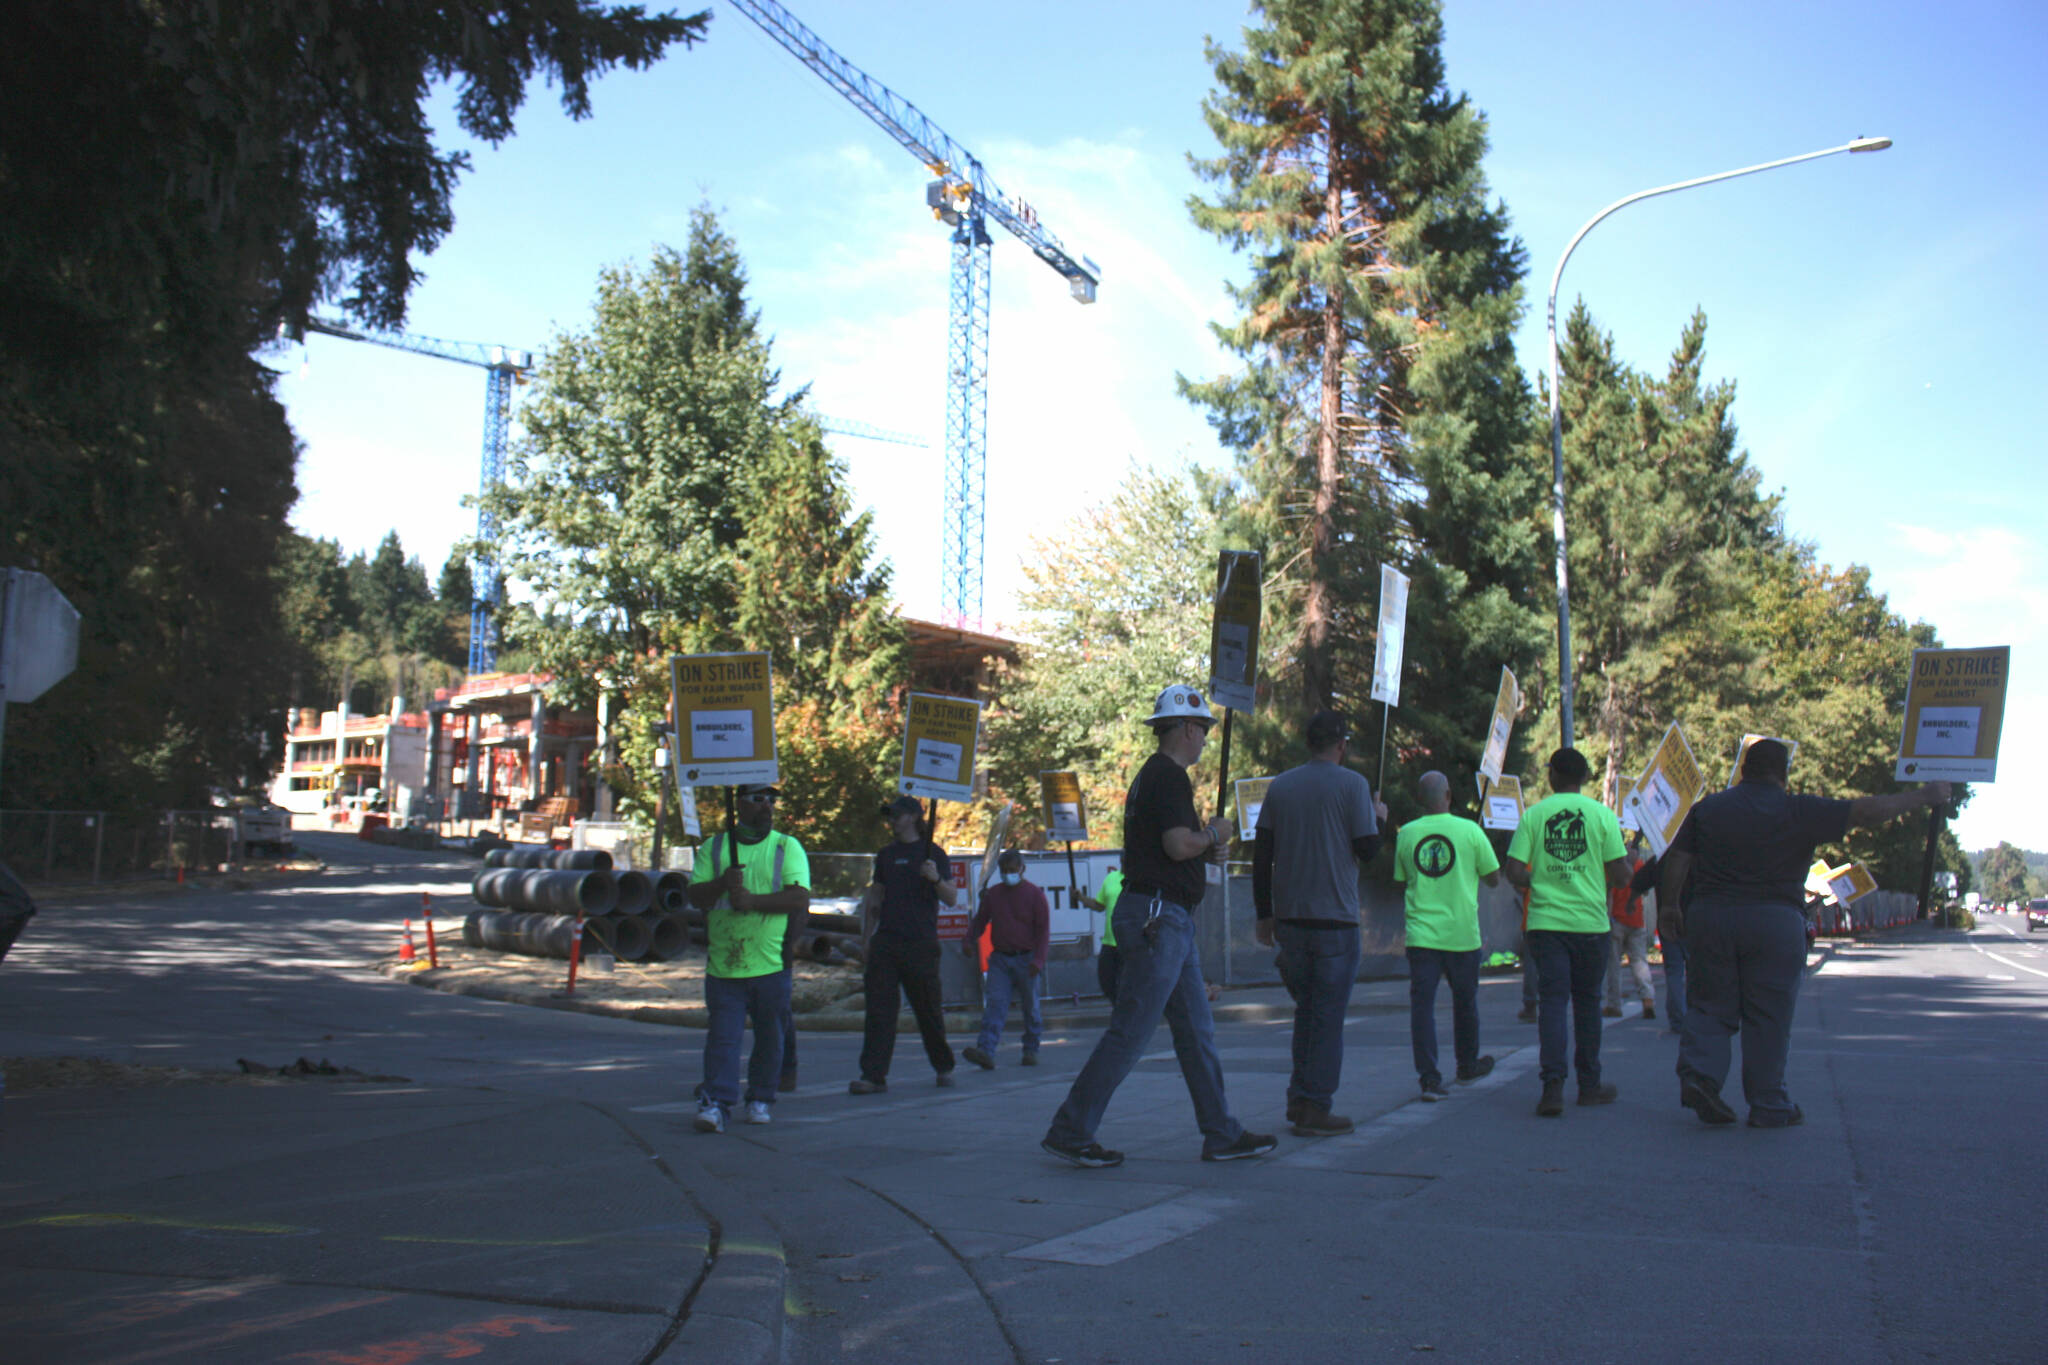 NW Carpenters Union members strike in front of Redmond Facebook campus construction site (Photo by Cameron Sheppard)